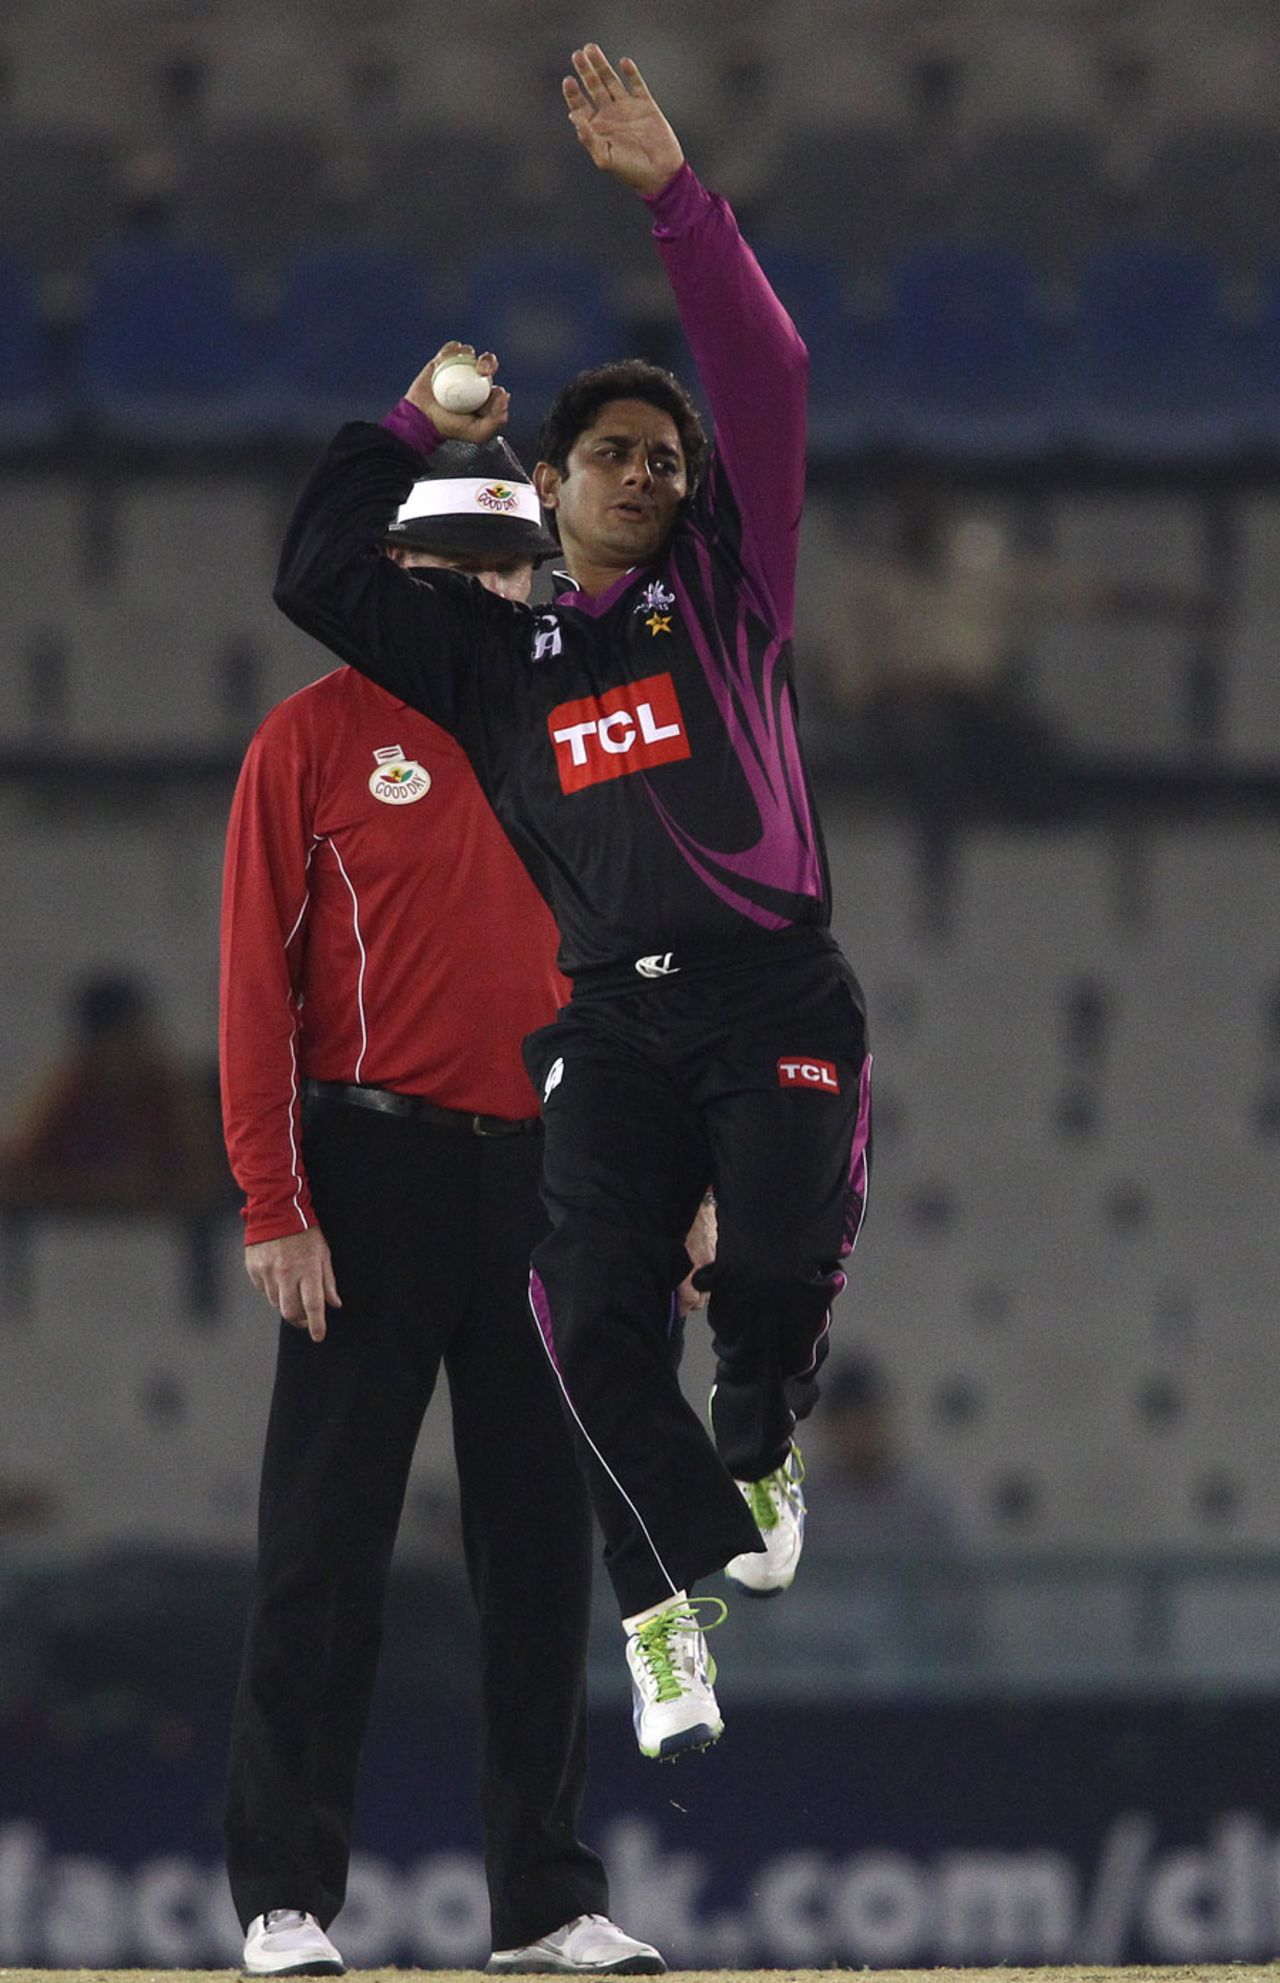 Saeed Ajmal went wicketless in the innings, Faisalabad Wolves v Sunrisers Hyderabad, Champions League Qualifiers, Mohali, September 18, 2013